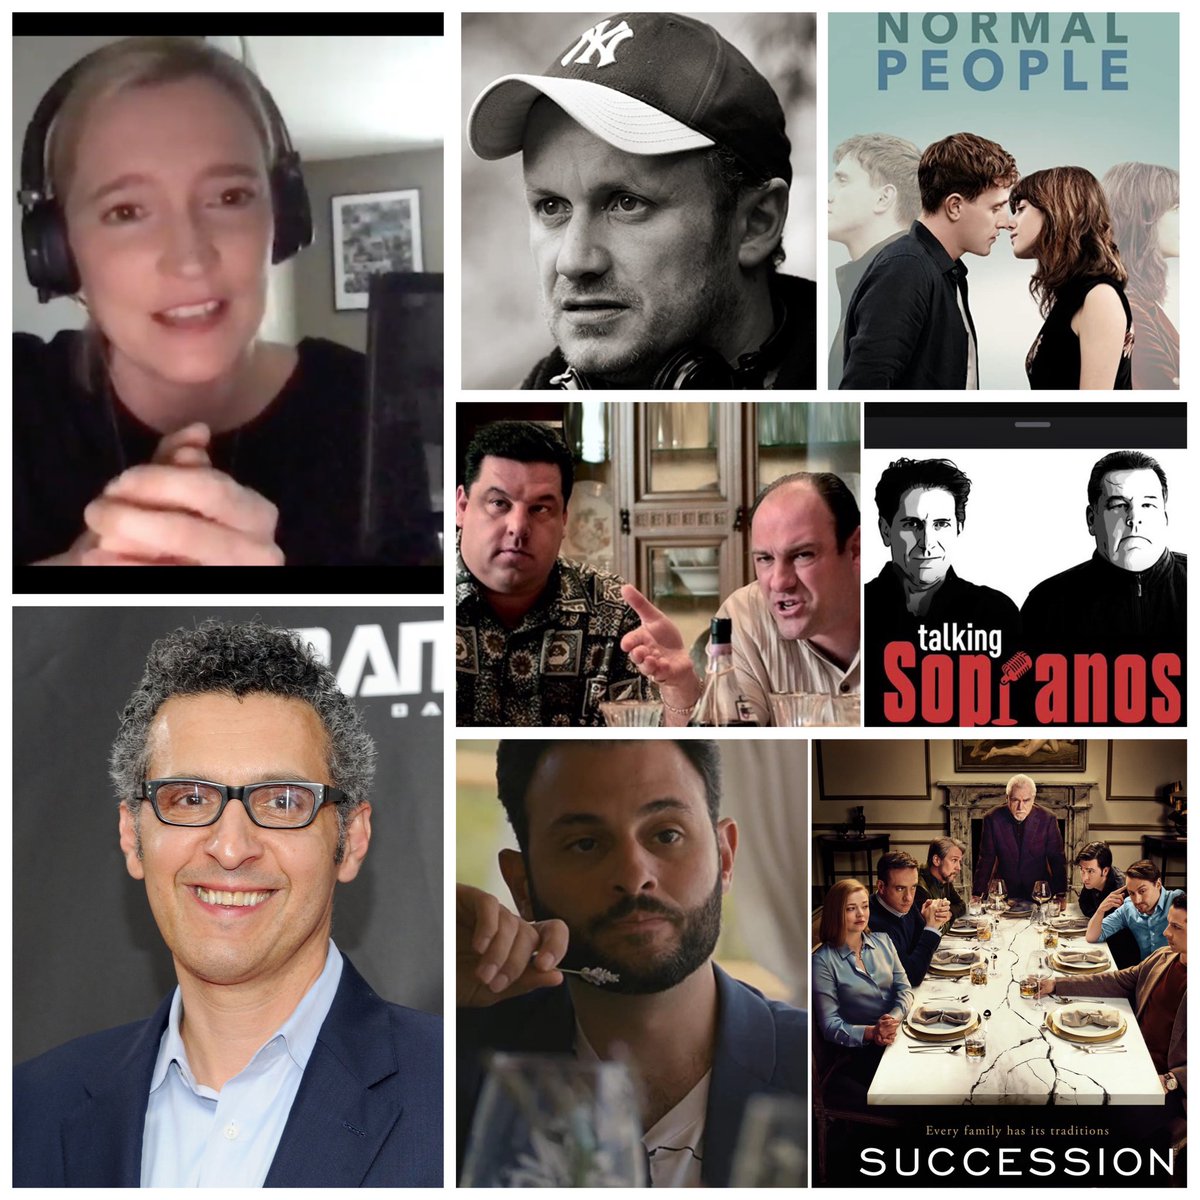 Catch up on the Pop Culture Confidential season! Here are some of my latest interviews, find them all at popcultureconfidential.com 🔥❤️ @iTunes 
#johnturturro #thejesusrolls #steveschirripa #sopranos #arianmoayed #succession #lennyabrahamson #normalpeople #podcast @ArianMoayed